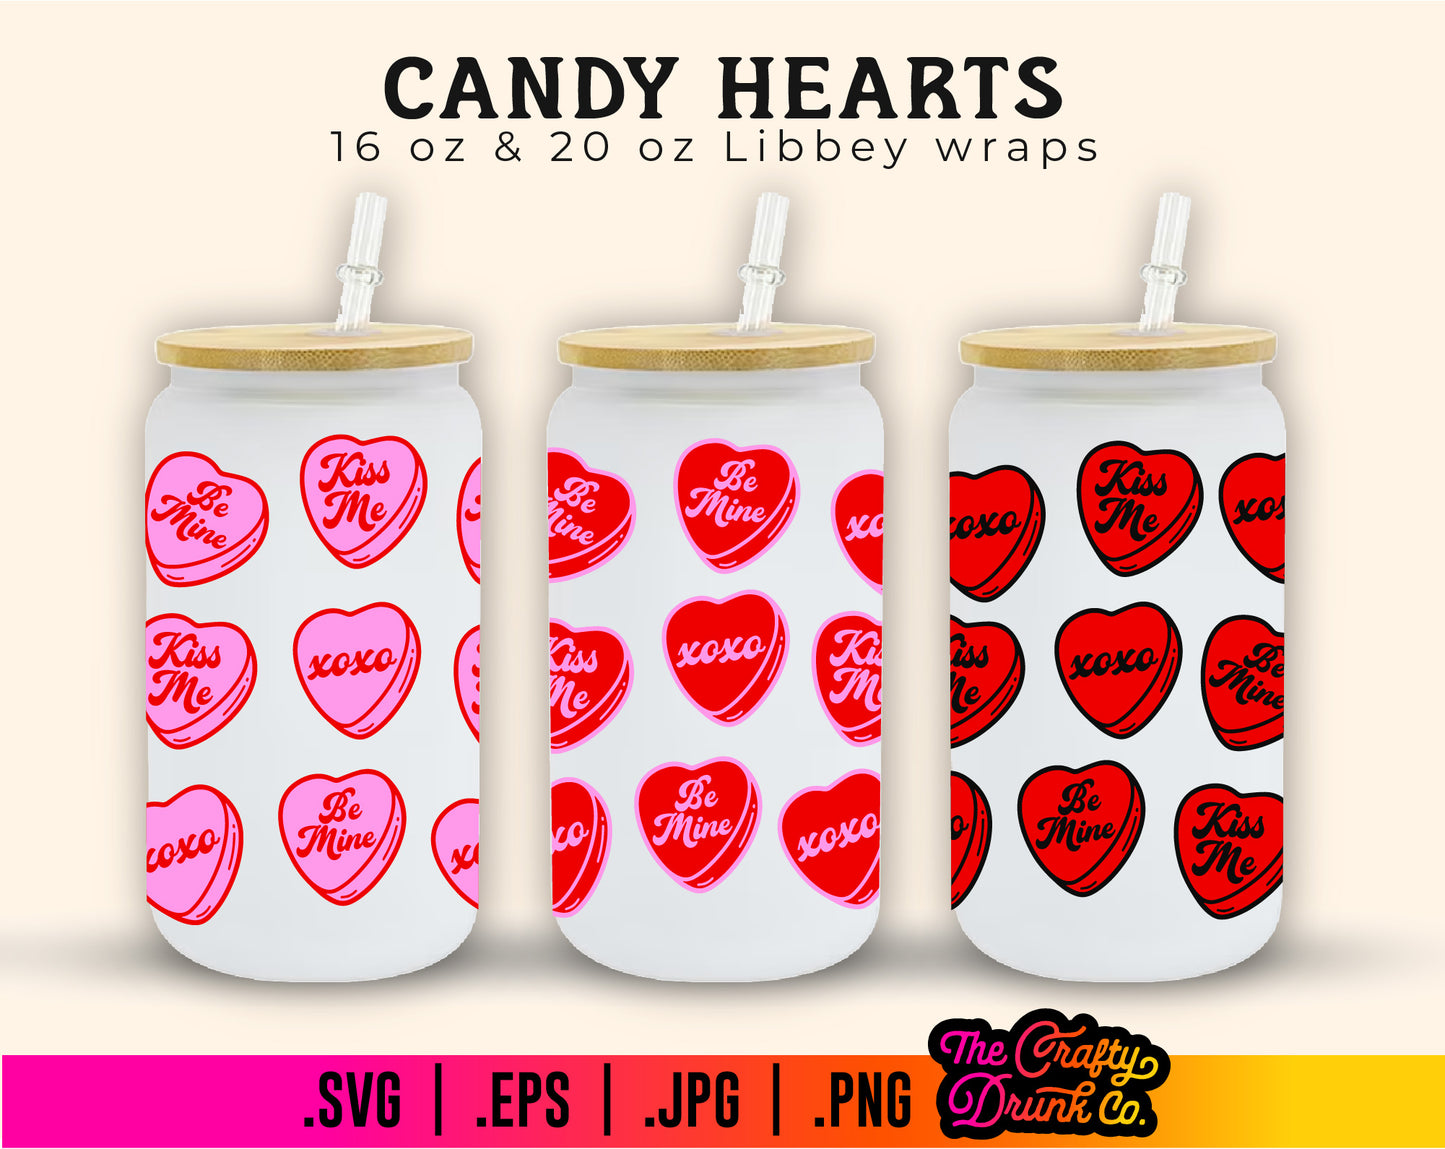 Candy Hearts Libbey Wraps